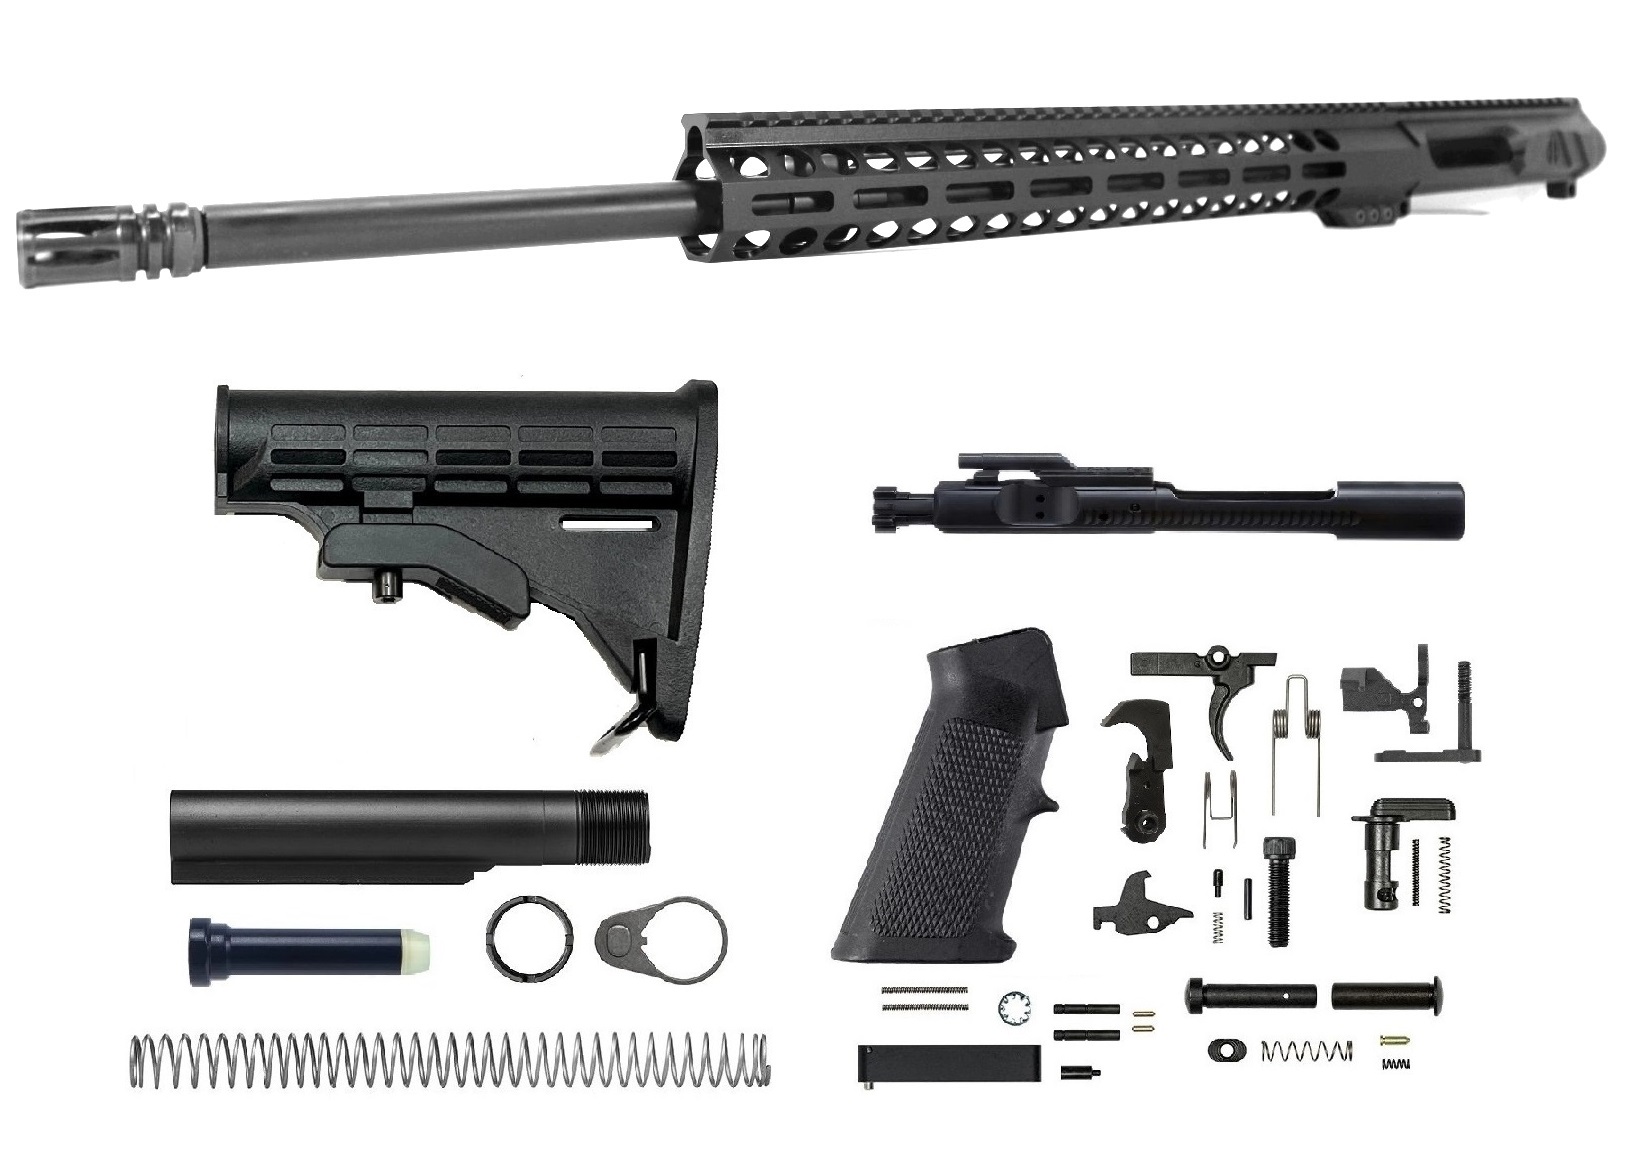 22 inch AR-15 LEFT HANDED AR-15 Non Reciprocating Side Charging 224 Valkyrie M-LOK Melonite Upper Complete Kit